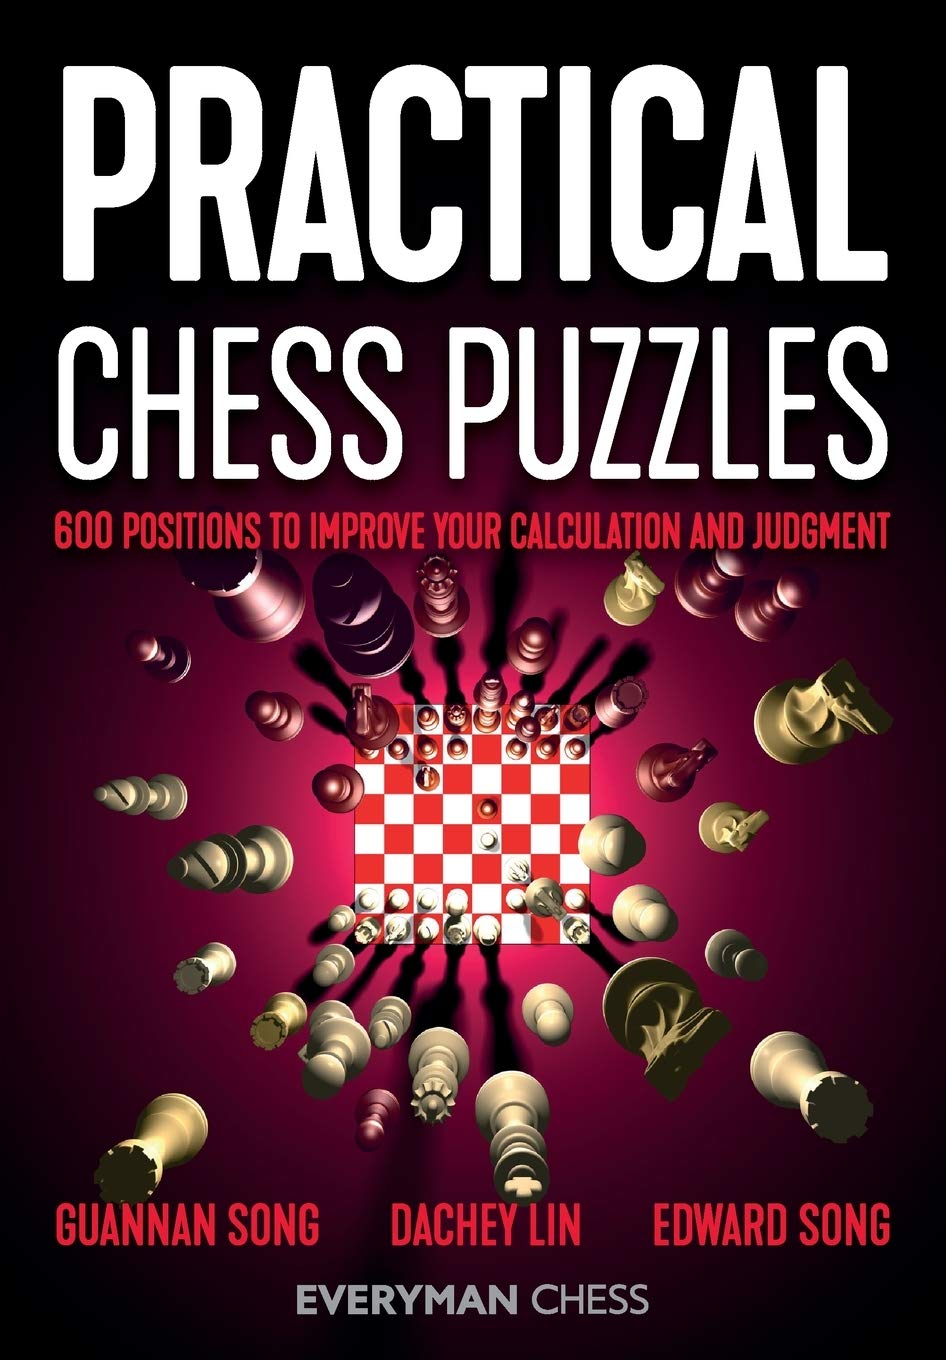 Practical Chess Puzzles